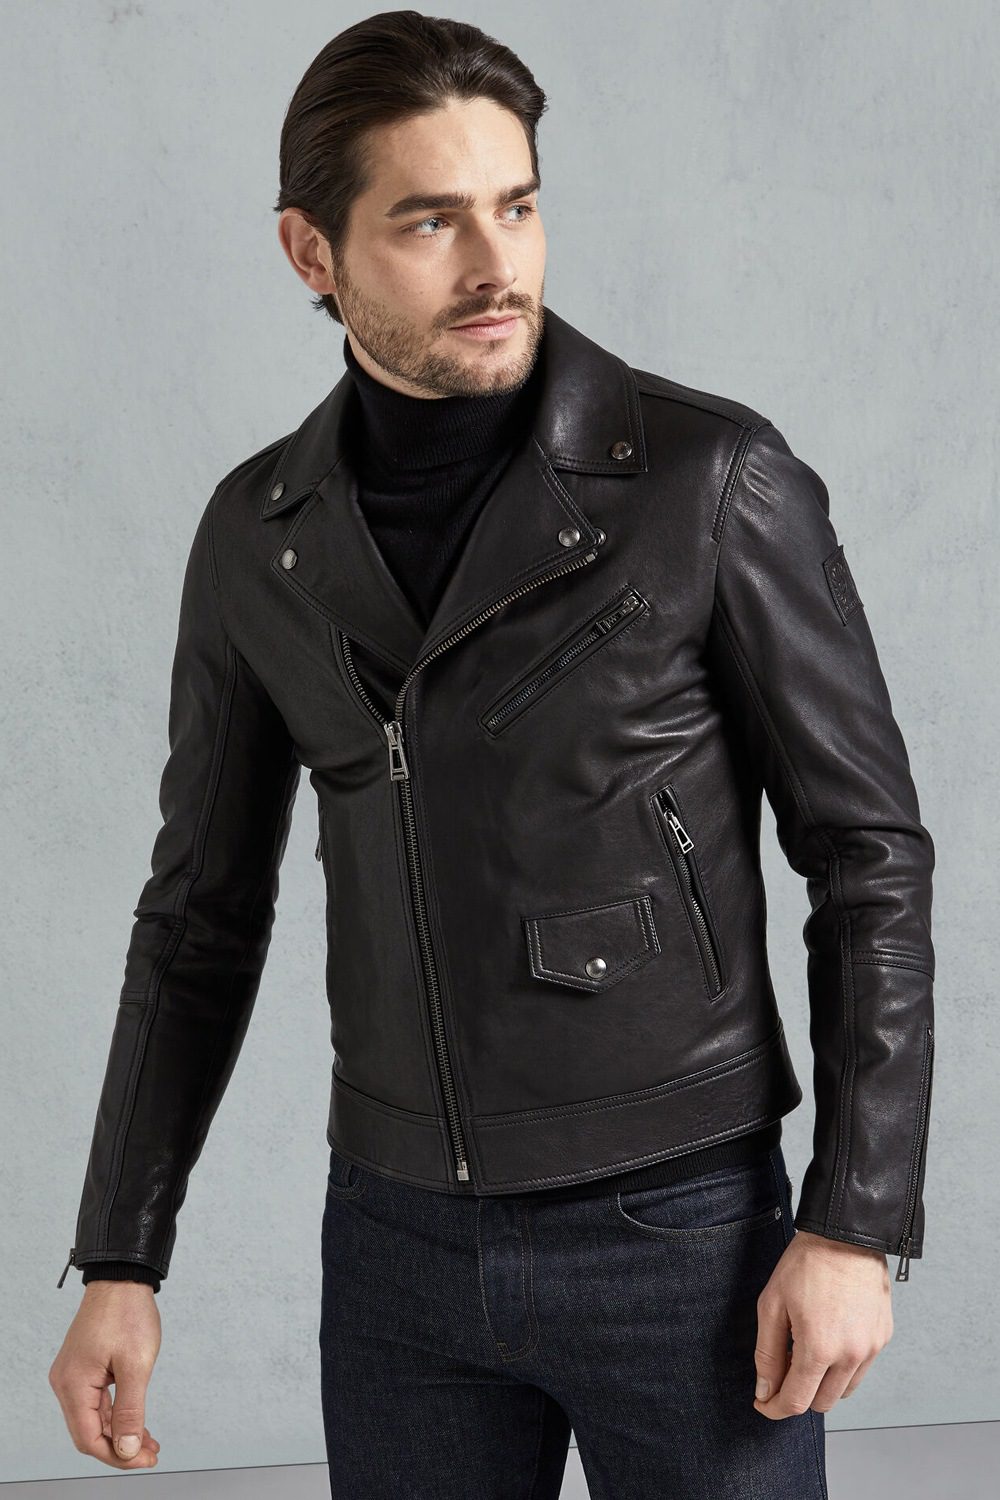 The Best Leather Jacket Brands For Men, Most Luxurious Leather Jacket